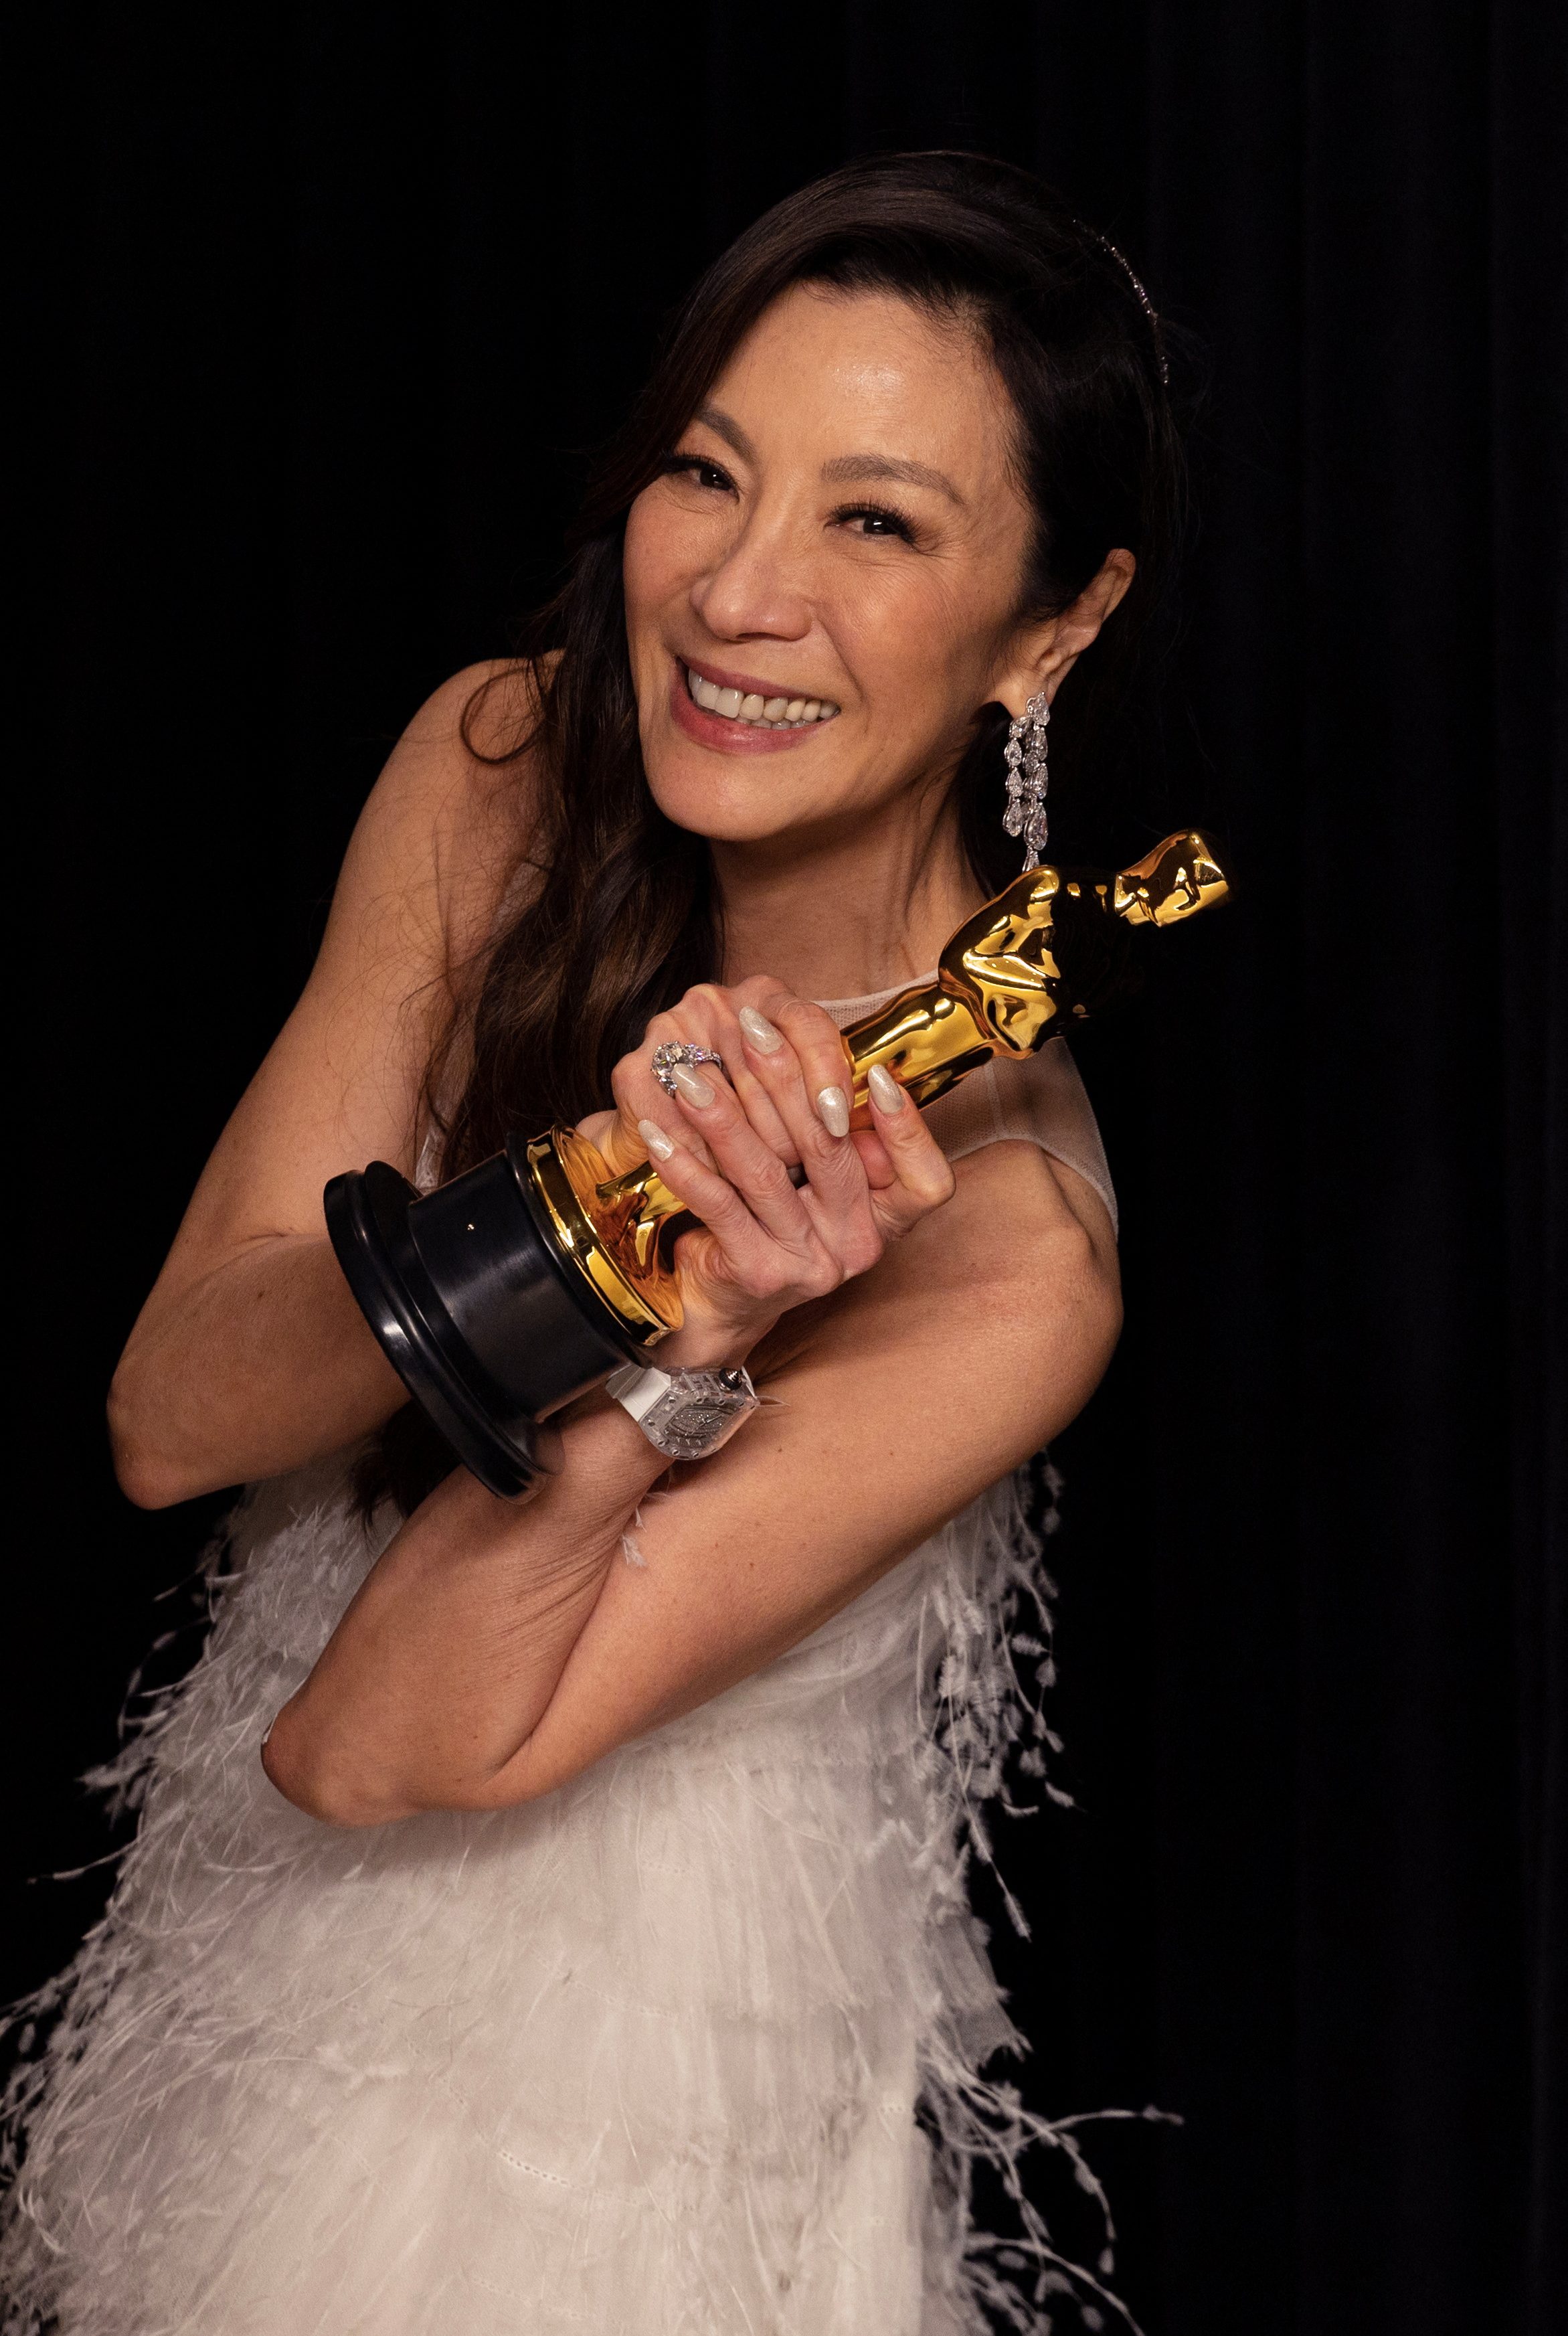 Yeoh made history as the first Asian actress to win a Best Actress Oscar at last month's Academy Awards.